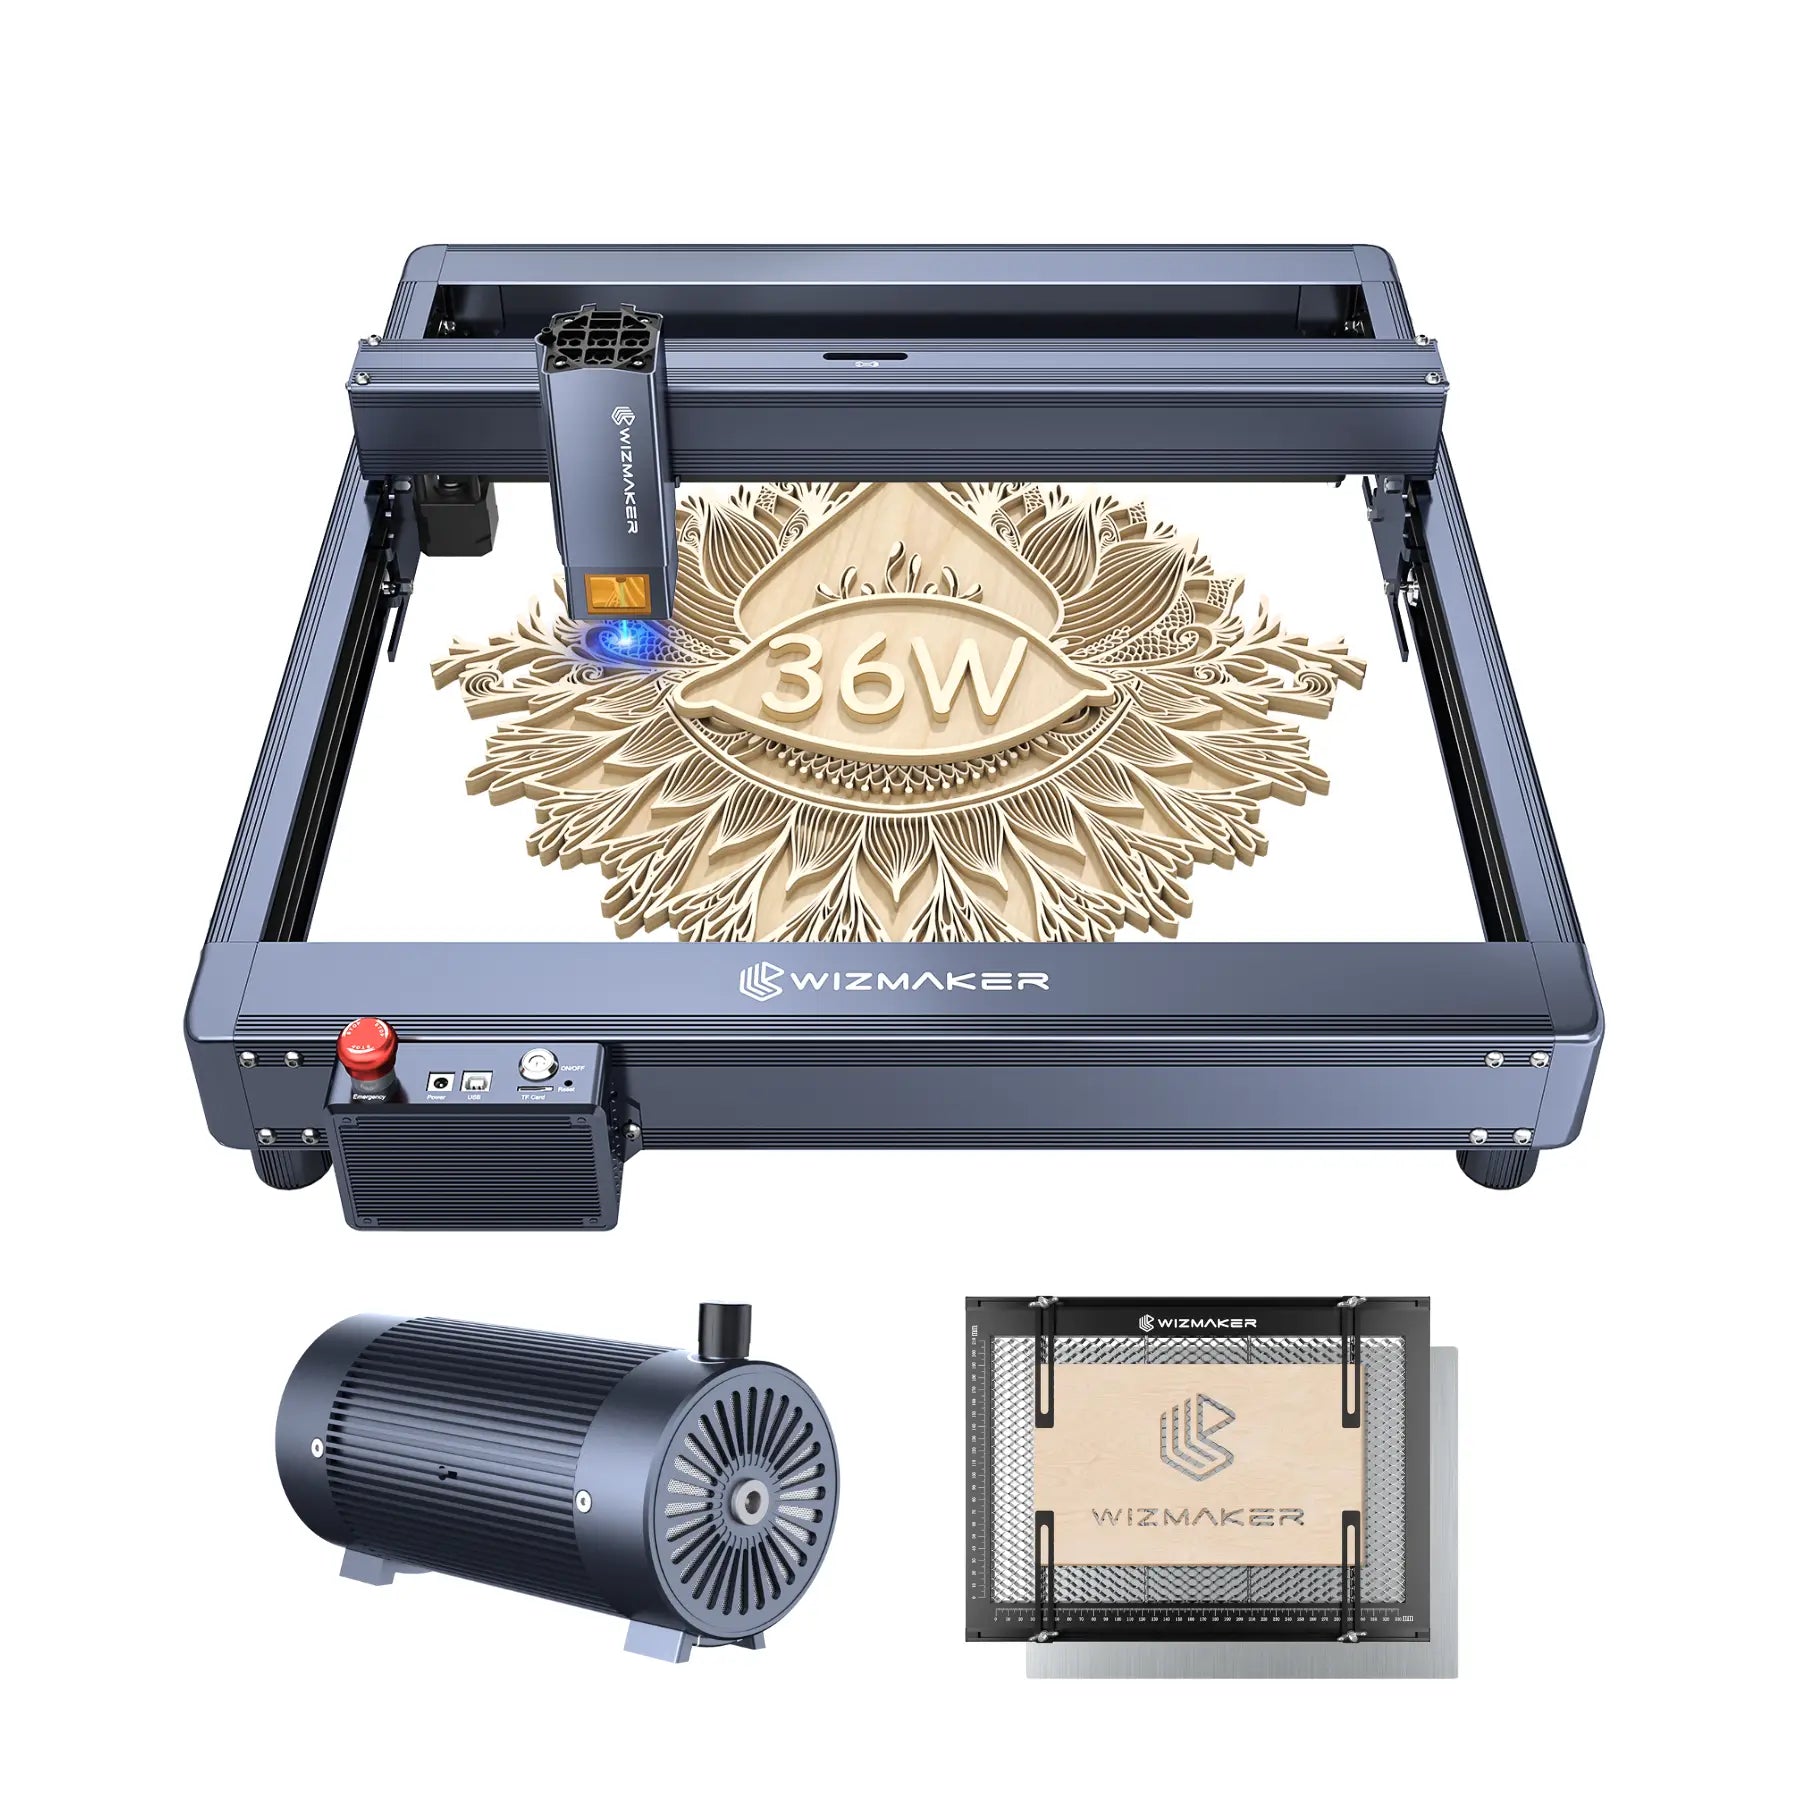 Laser Engraver for Leather - Creative Options and Uses